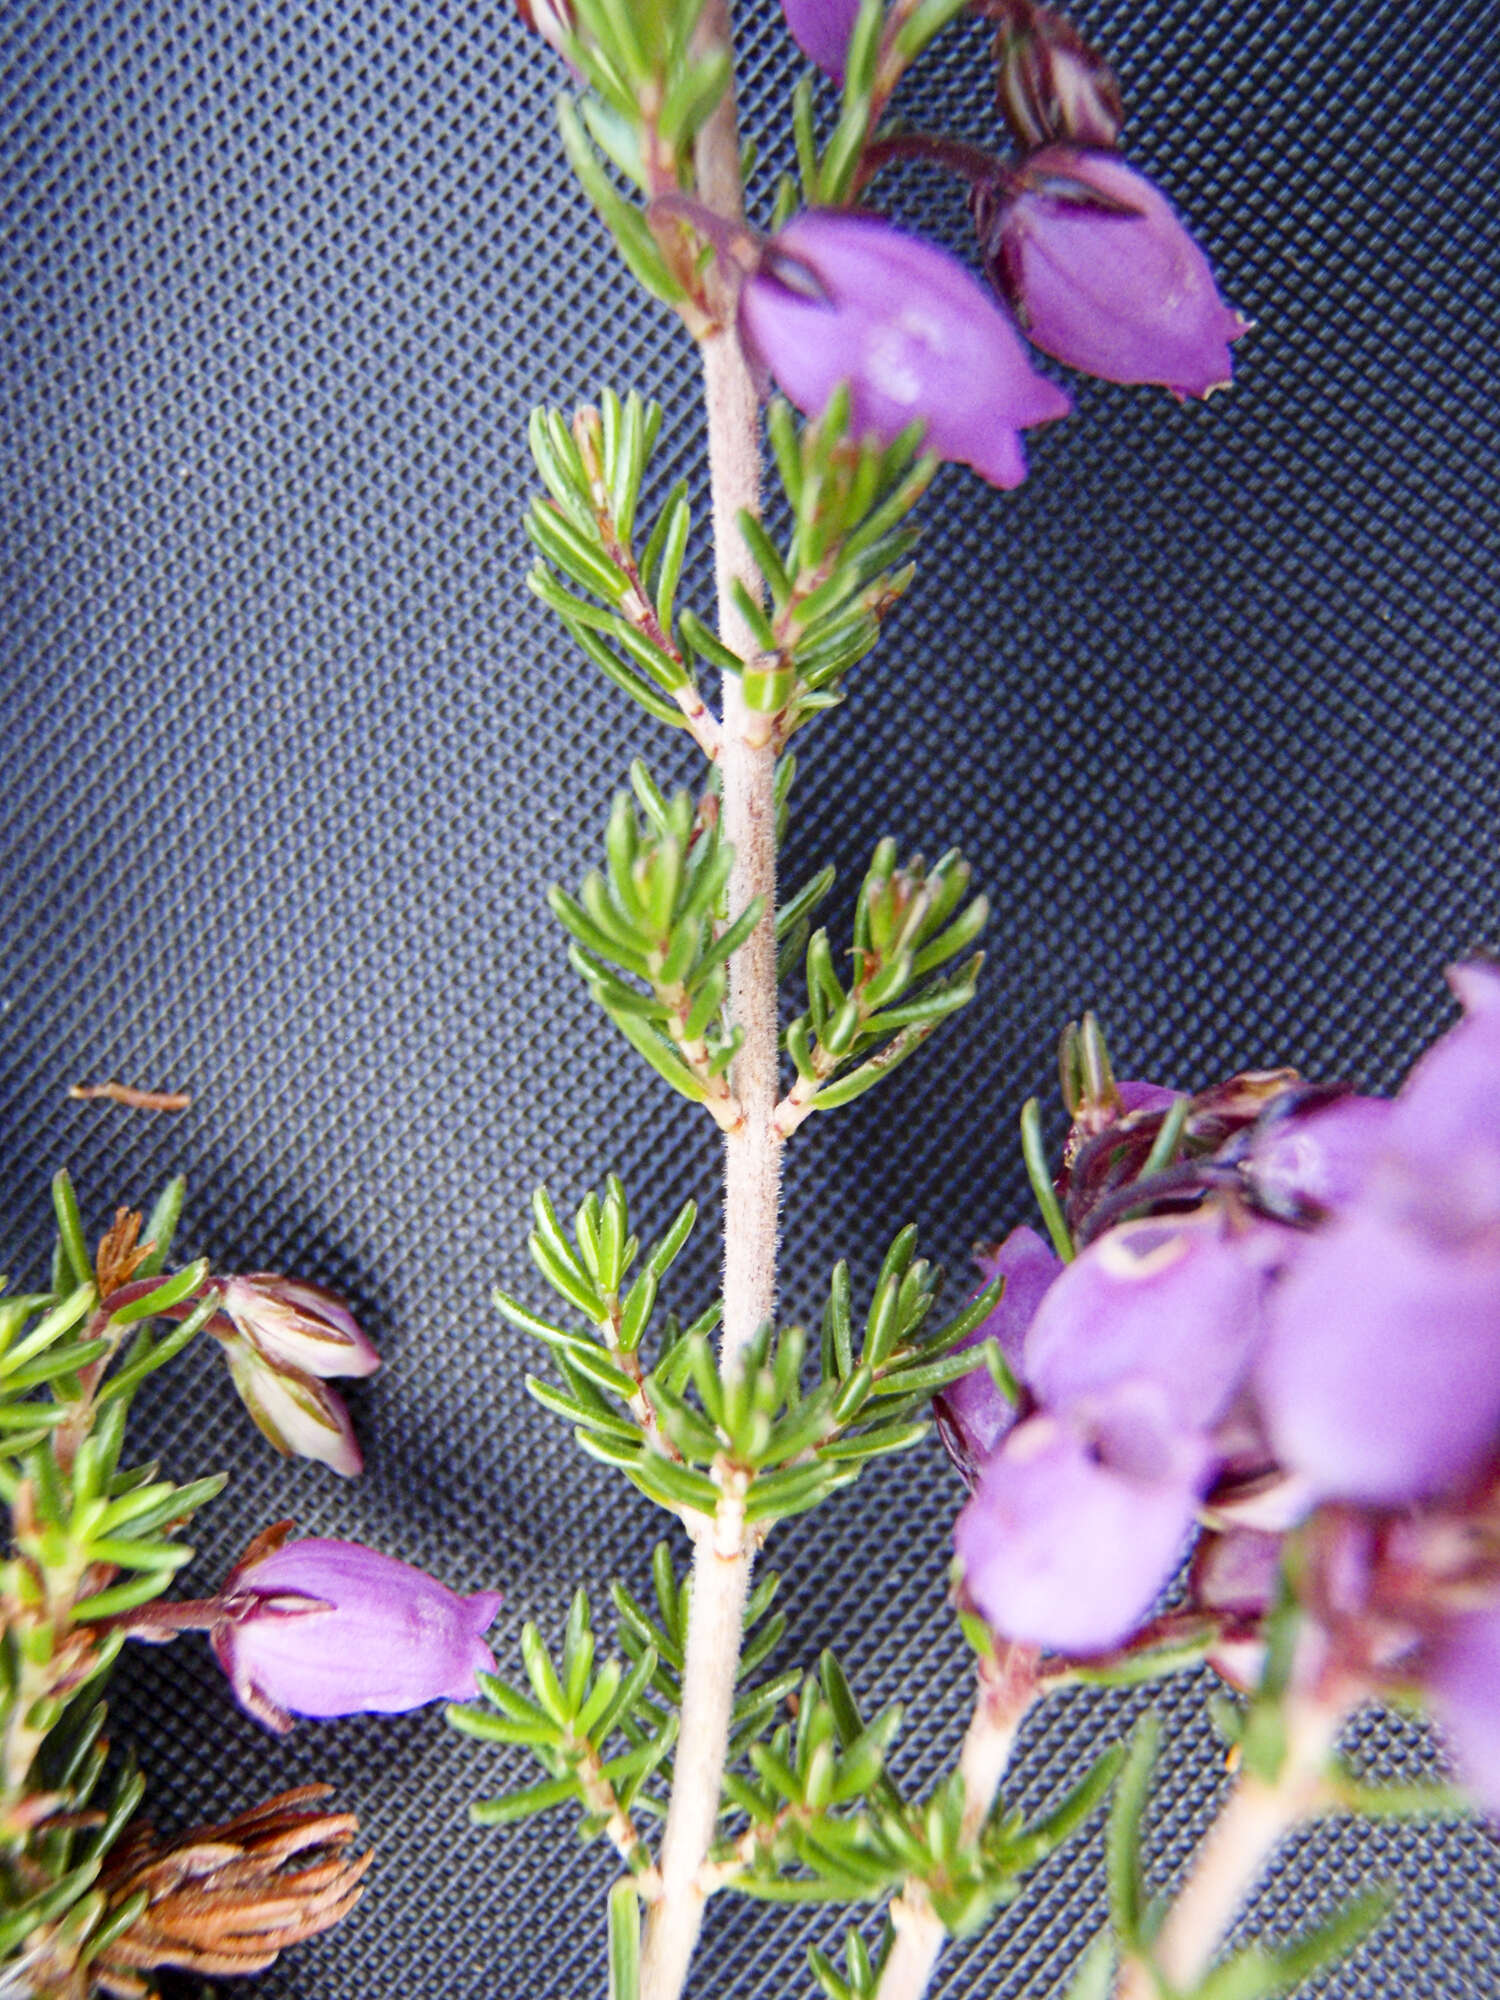 Image of Bell Heather